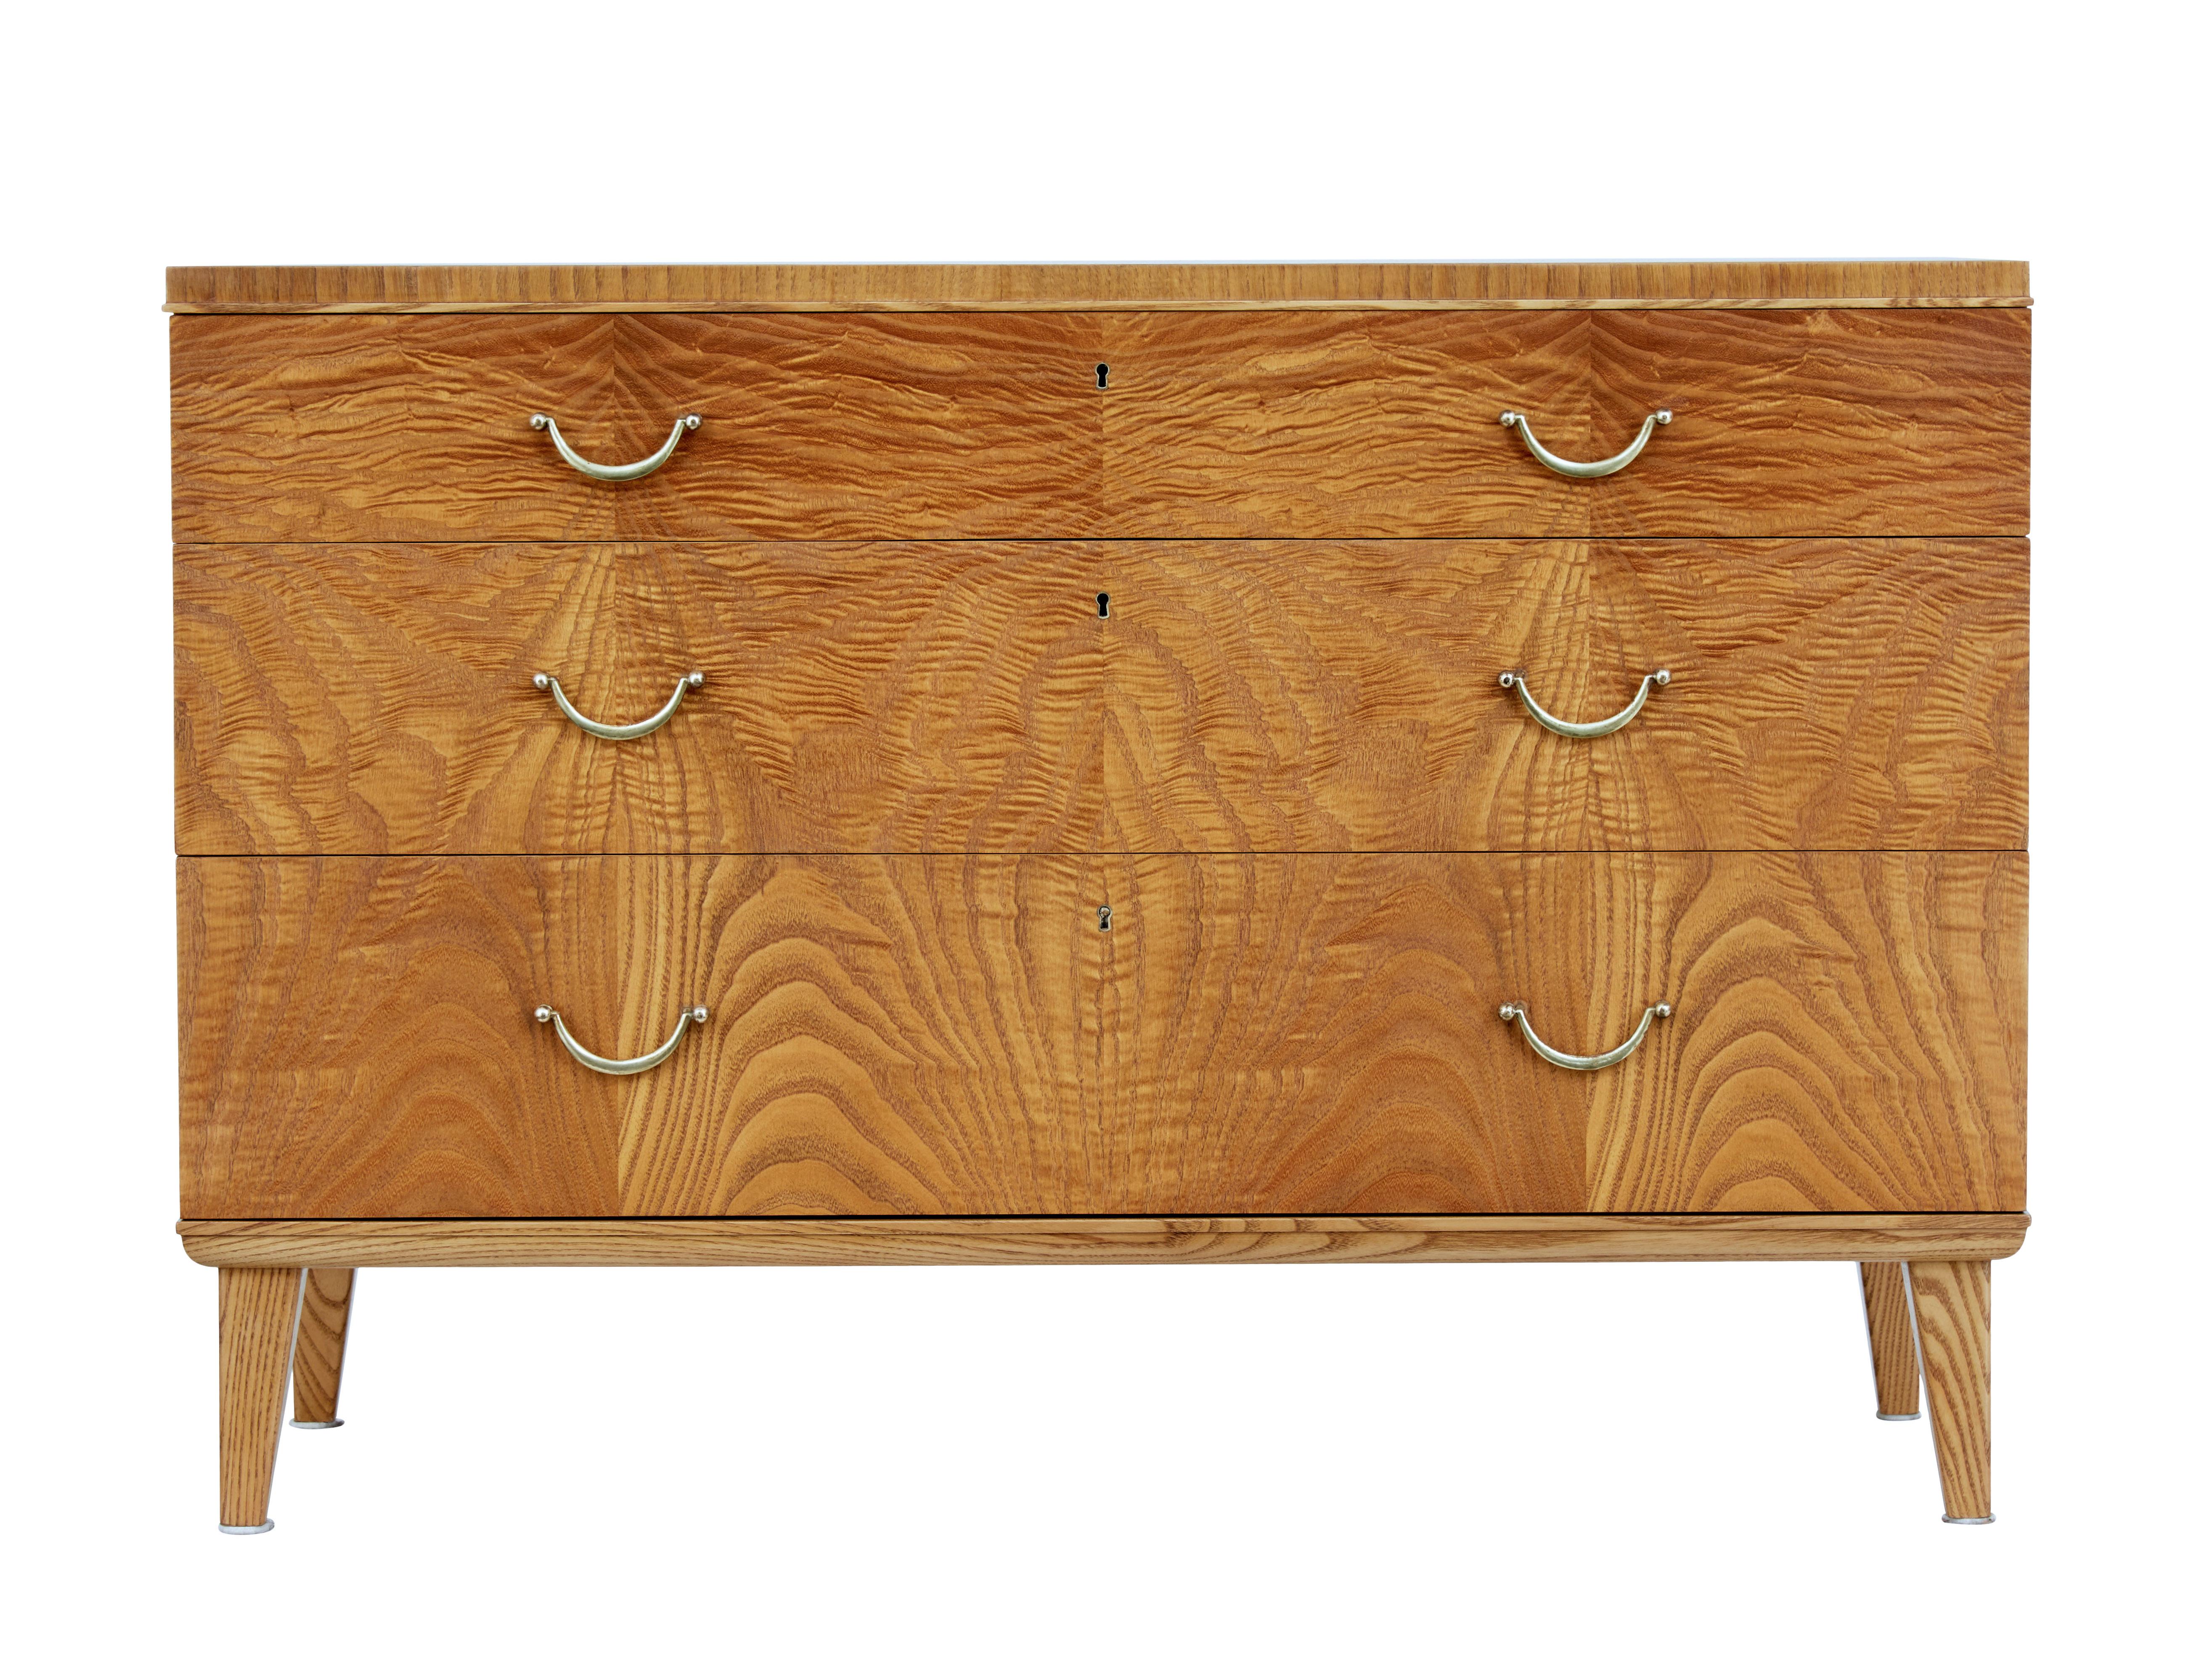 Mid-20th century elm chest of drawers by smf Bodafors, circa 1940.

Stunning chest of drawers produced by Swedish company Bodafors.

3 graduating drawers veneered in striking matched elm veneers which flow down through the drawers, each fitted